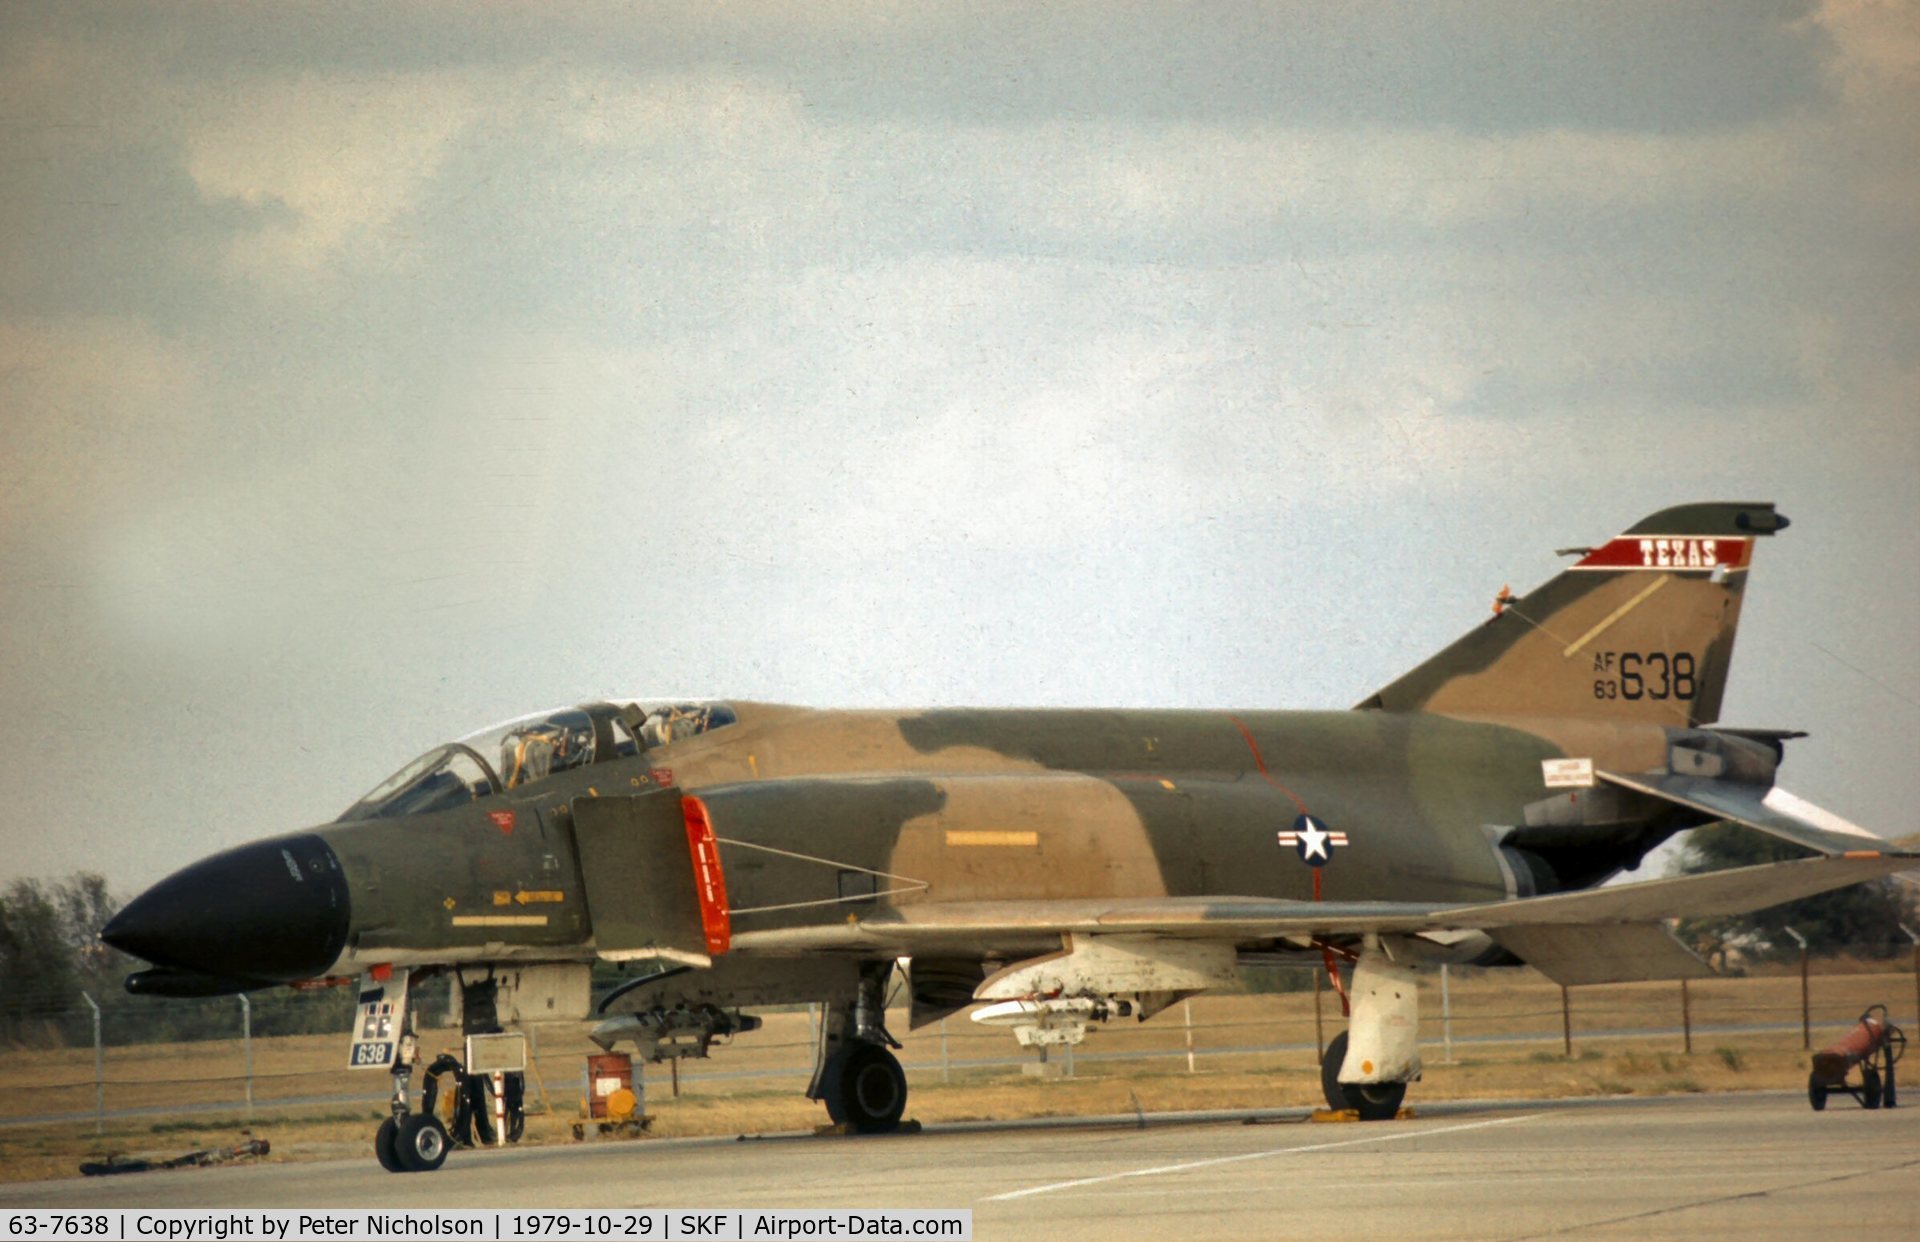 63-7638, 1963 McDonnell F-4C Phantom II C/N 734, Another of 182nd Tactical Fighter Squadron's Phantoms seen at Kelly AFB in October 1979.